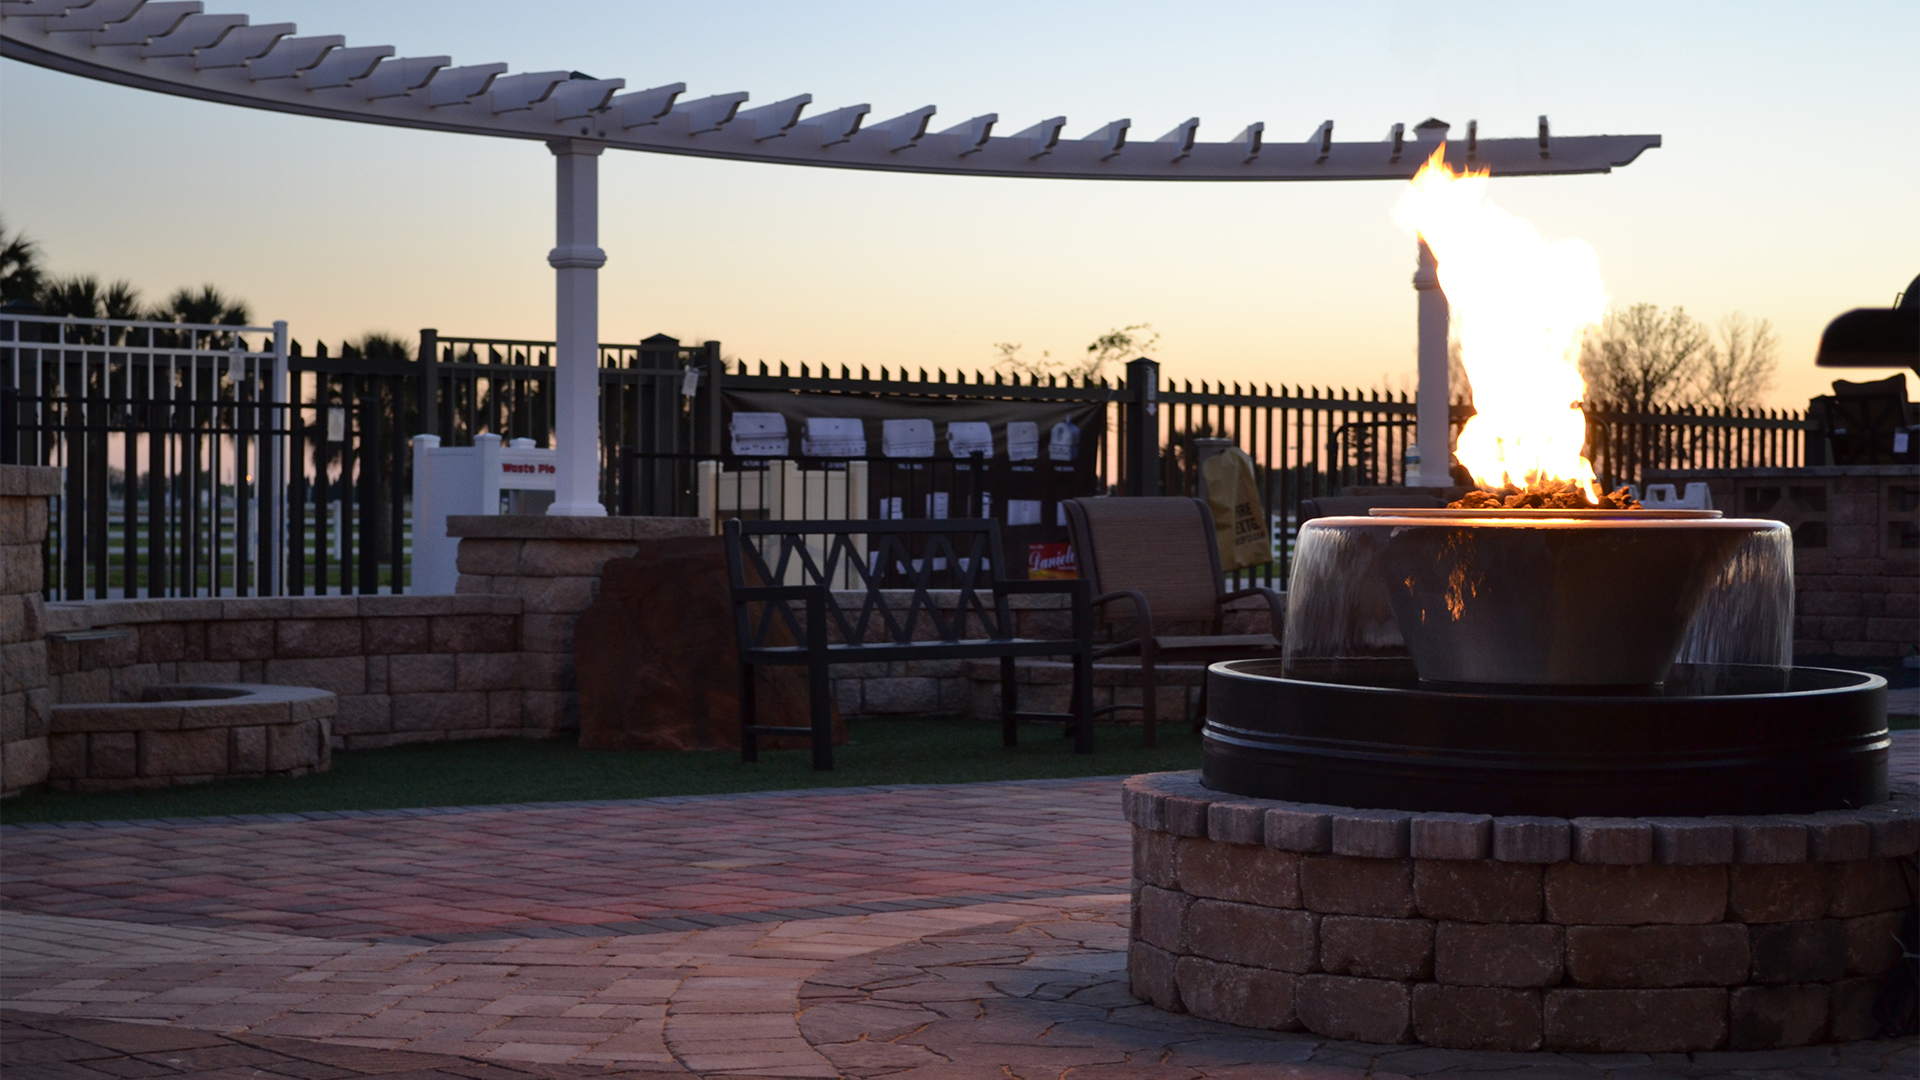 Danielle Fence & Outdoor Living | Danielle Fence Showroom - Fire Water Bowl